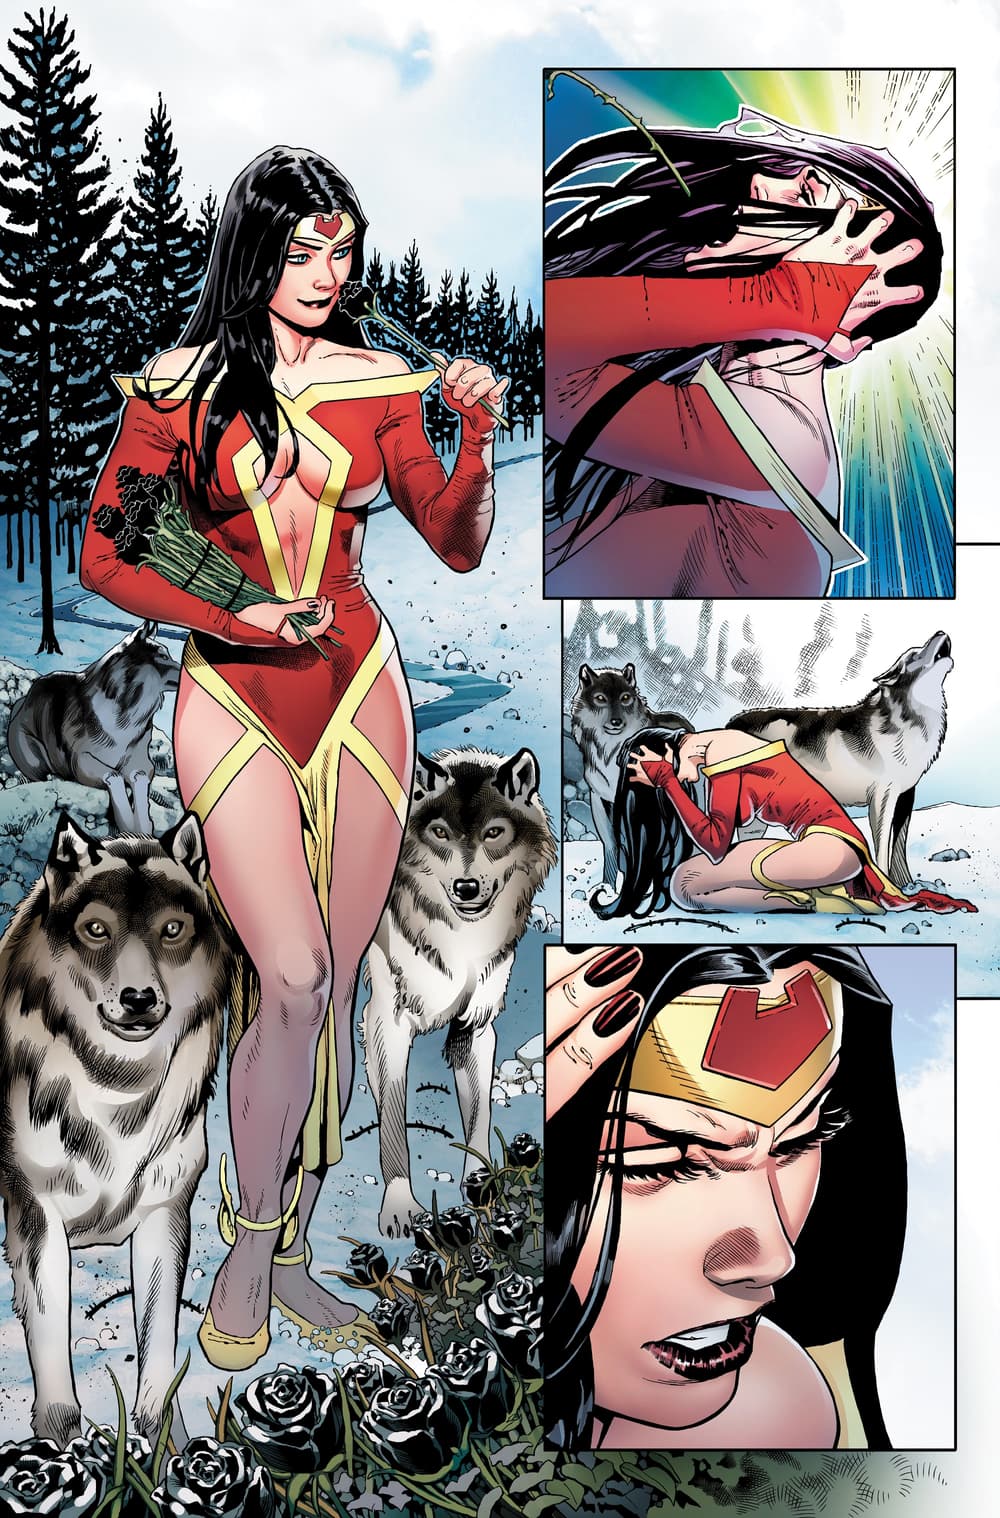 MARVEL COMICS PRESENTS #6 Interior art by Paulo Siqueira with inks by Oren Junior, and colors by